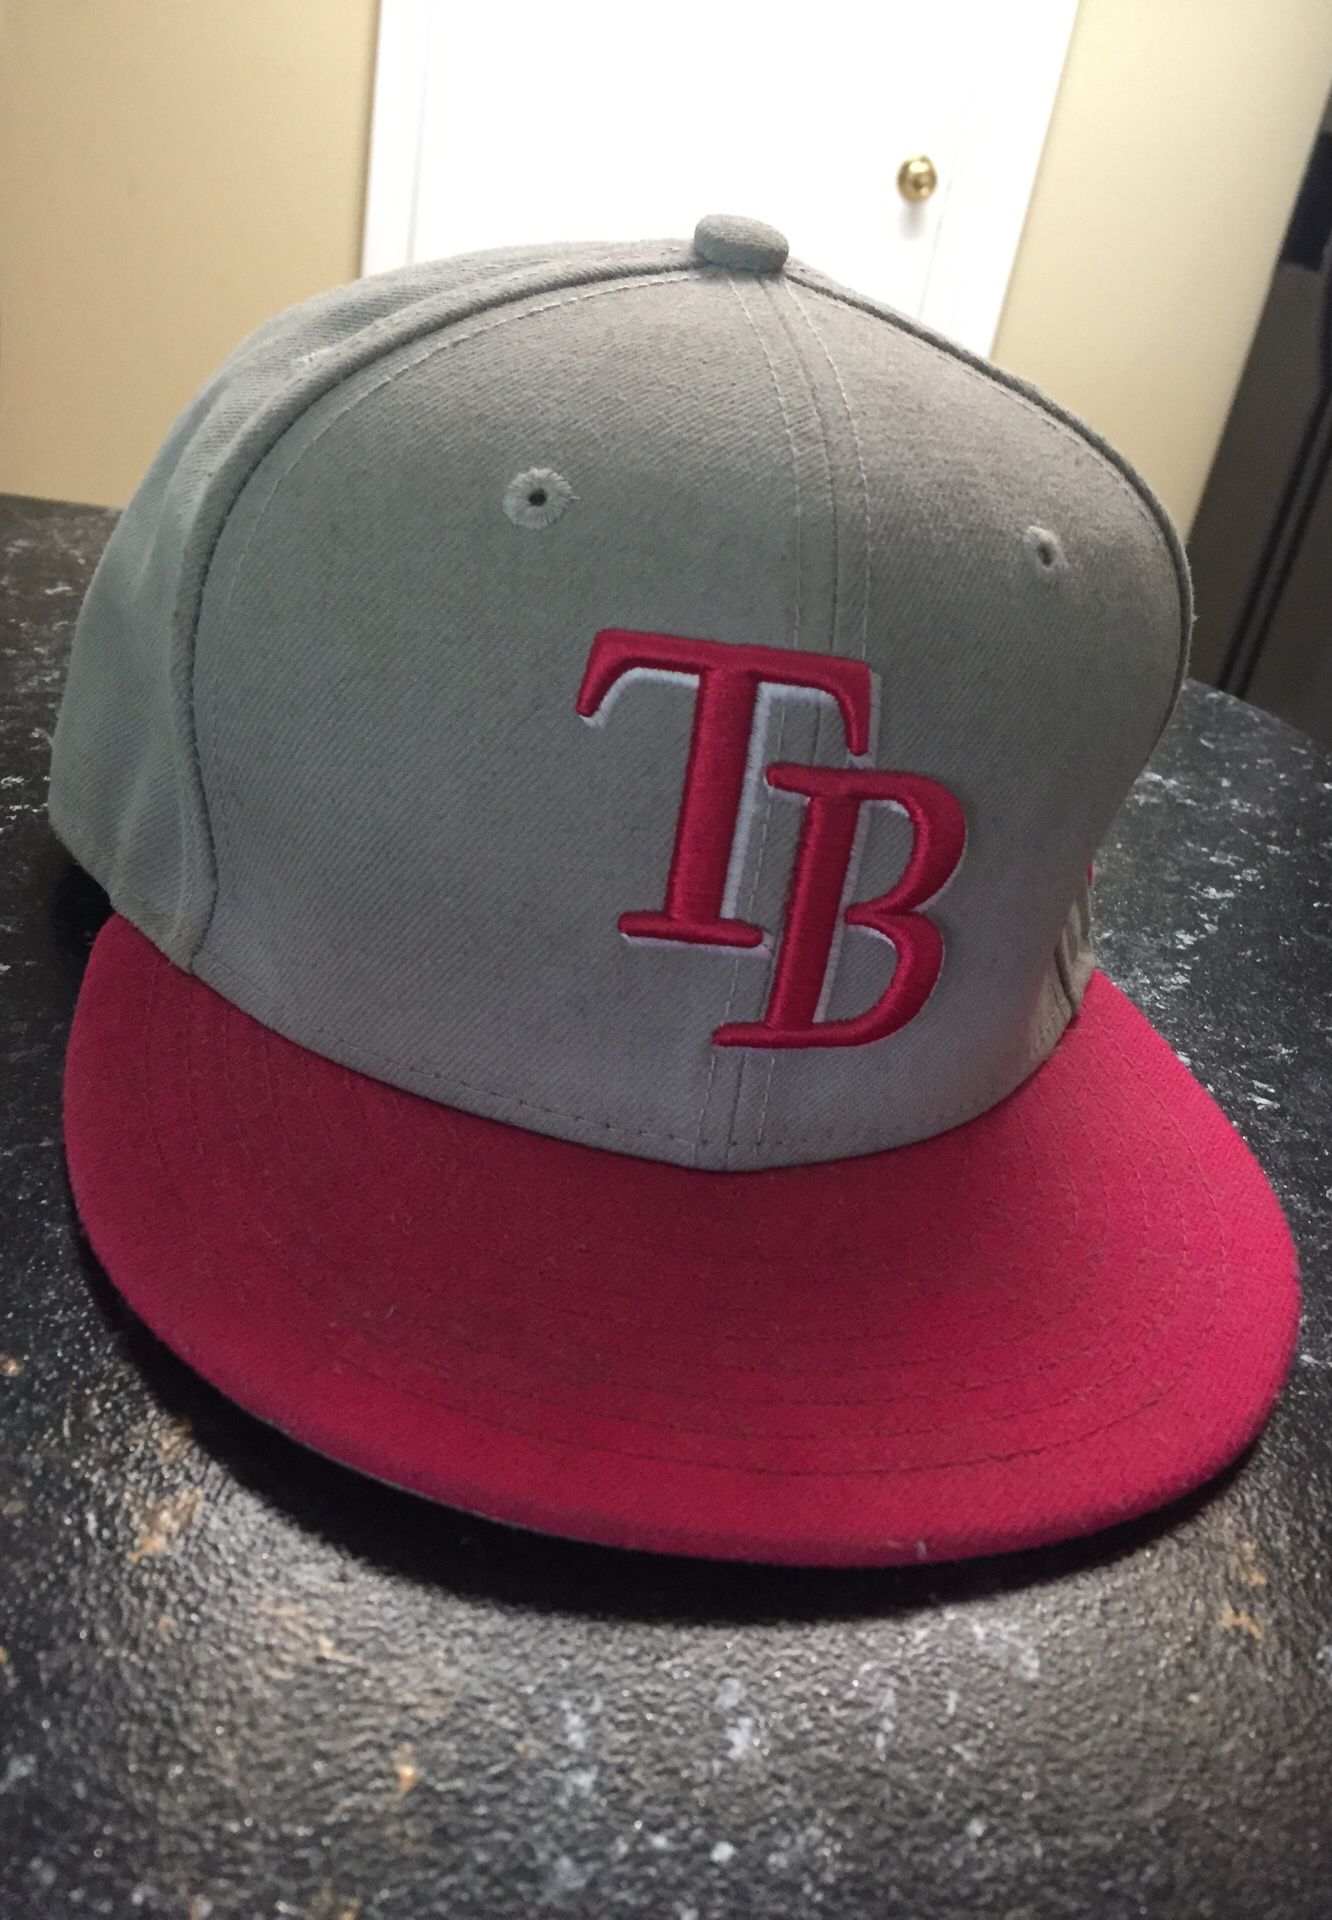 Tampa bay rays pink and grey hat